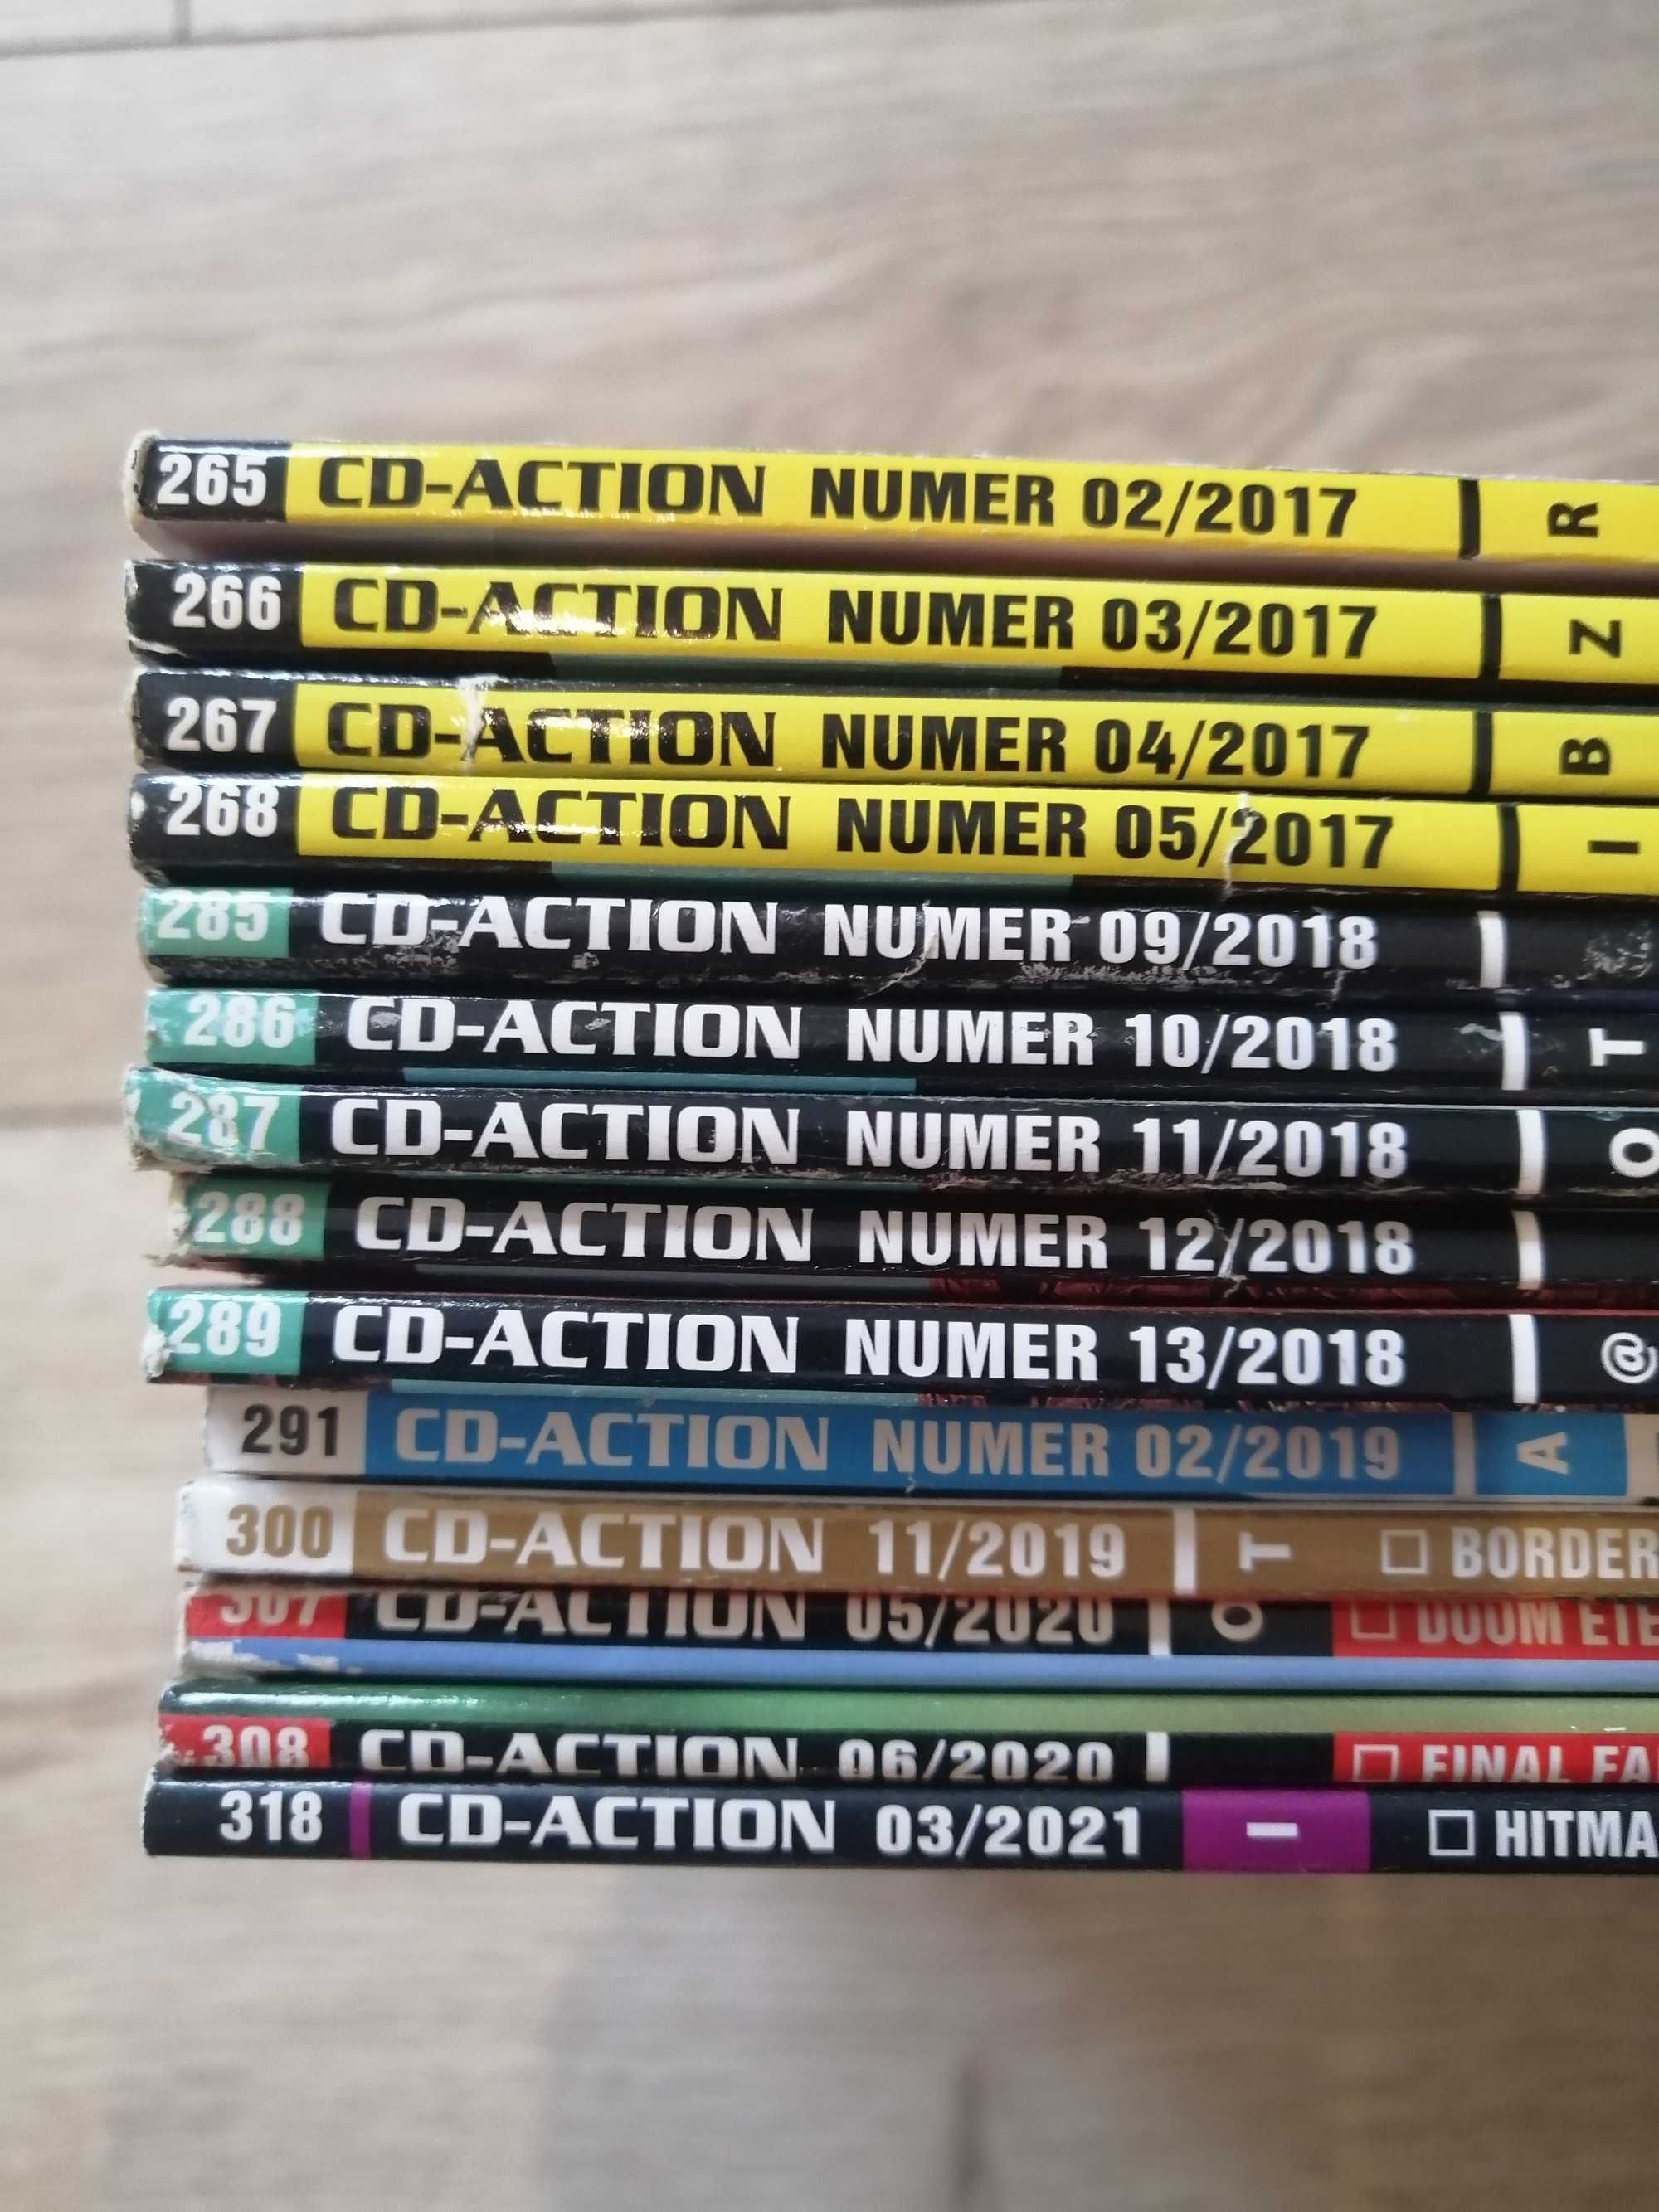 CD-Action nr 03/2021 (318)